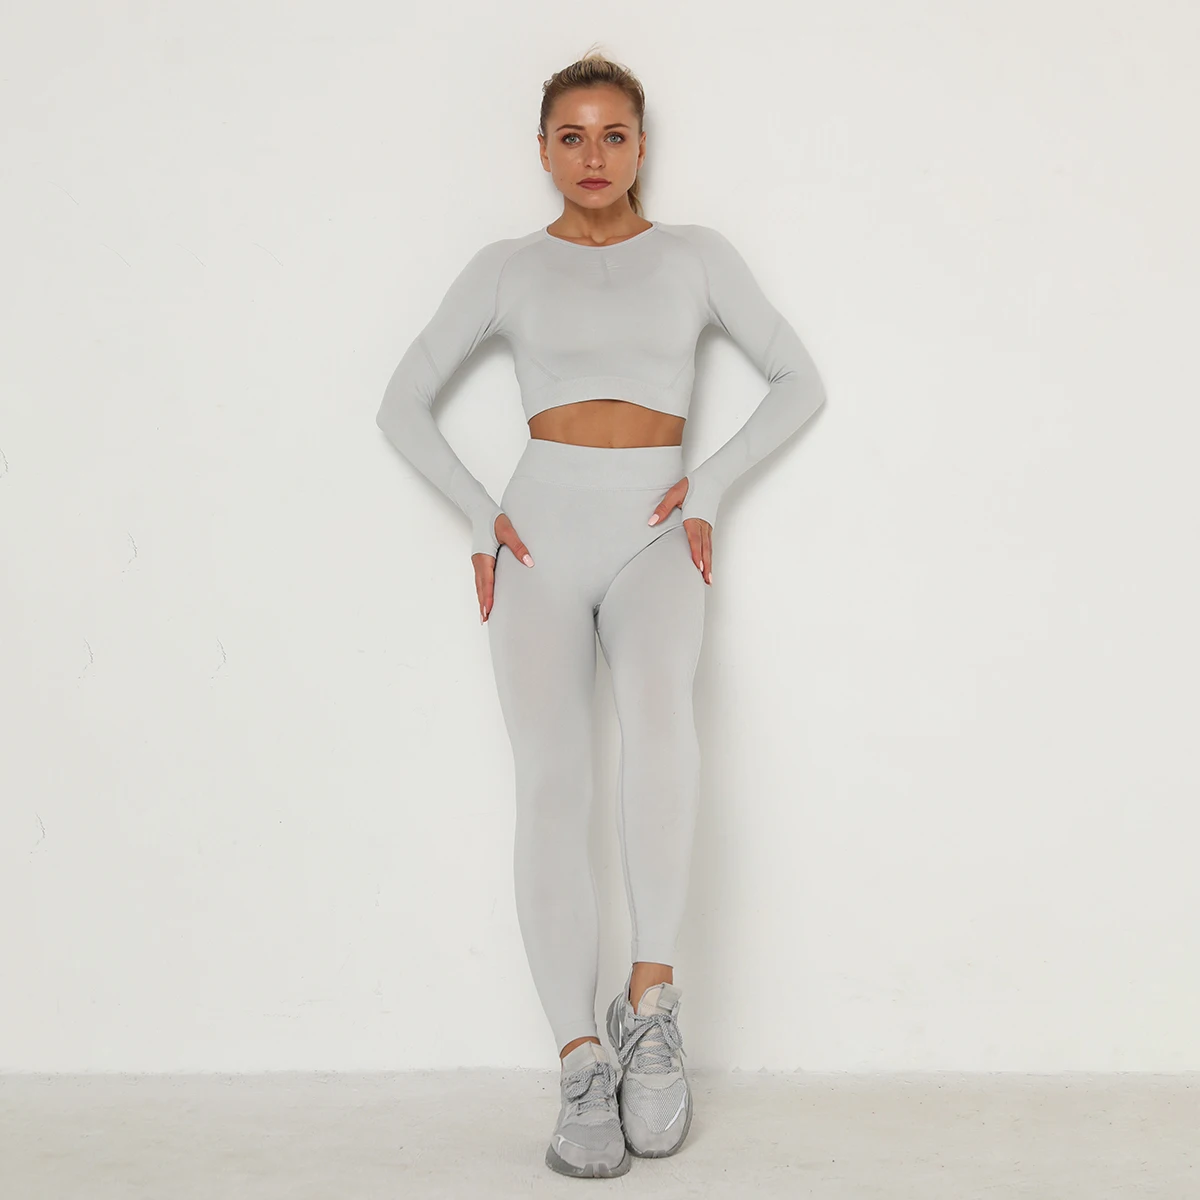 Women's Seamless Outfits High Waist Push Up Leggings Gym Clothes